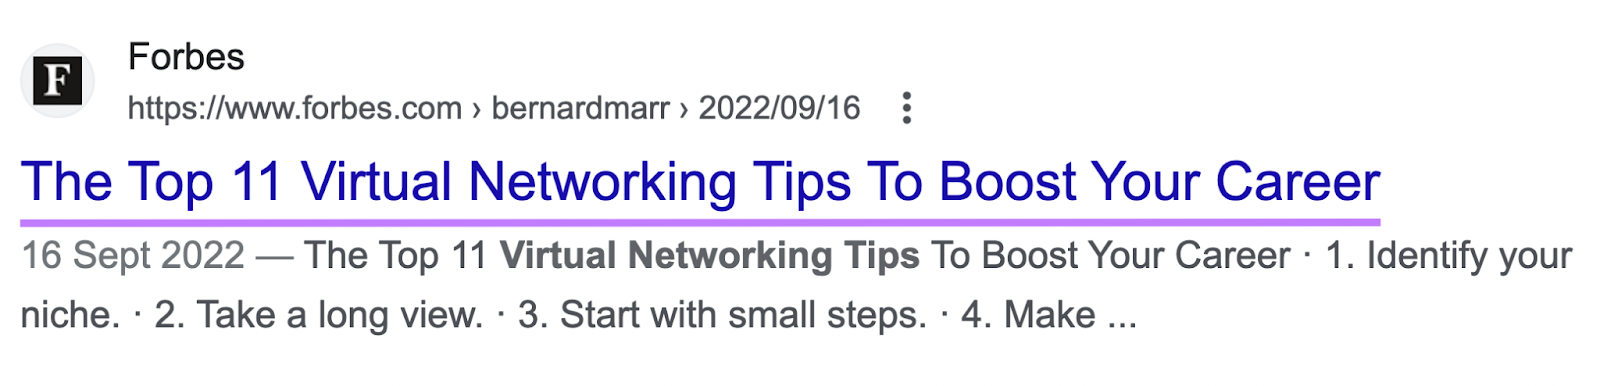 Forbes' article title "The Top 11 Virtual networking Tips To Boost Your Career" on SERP